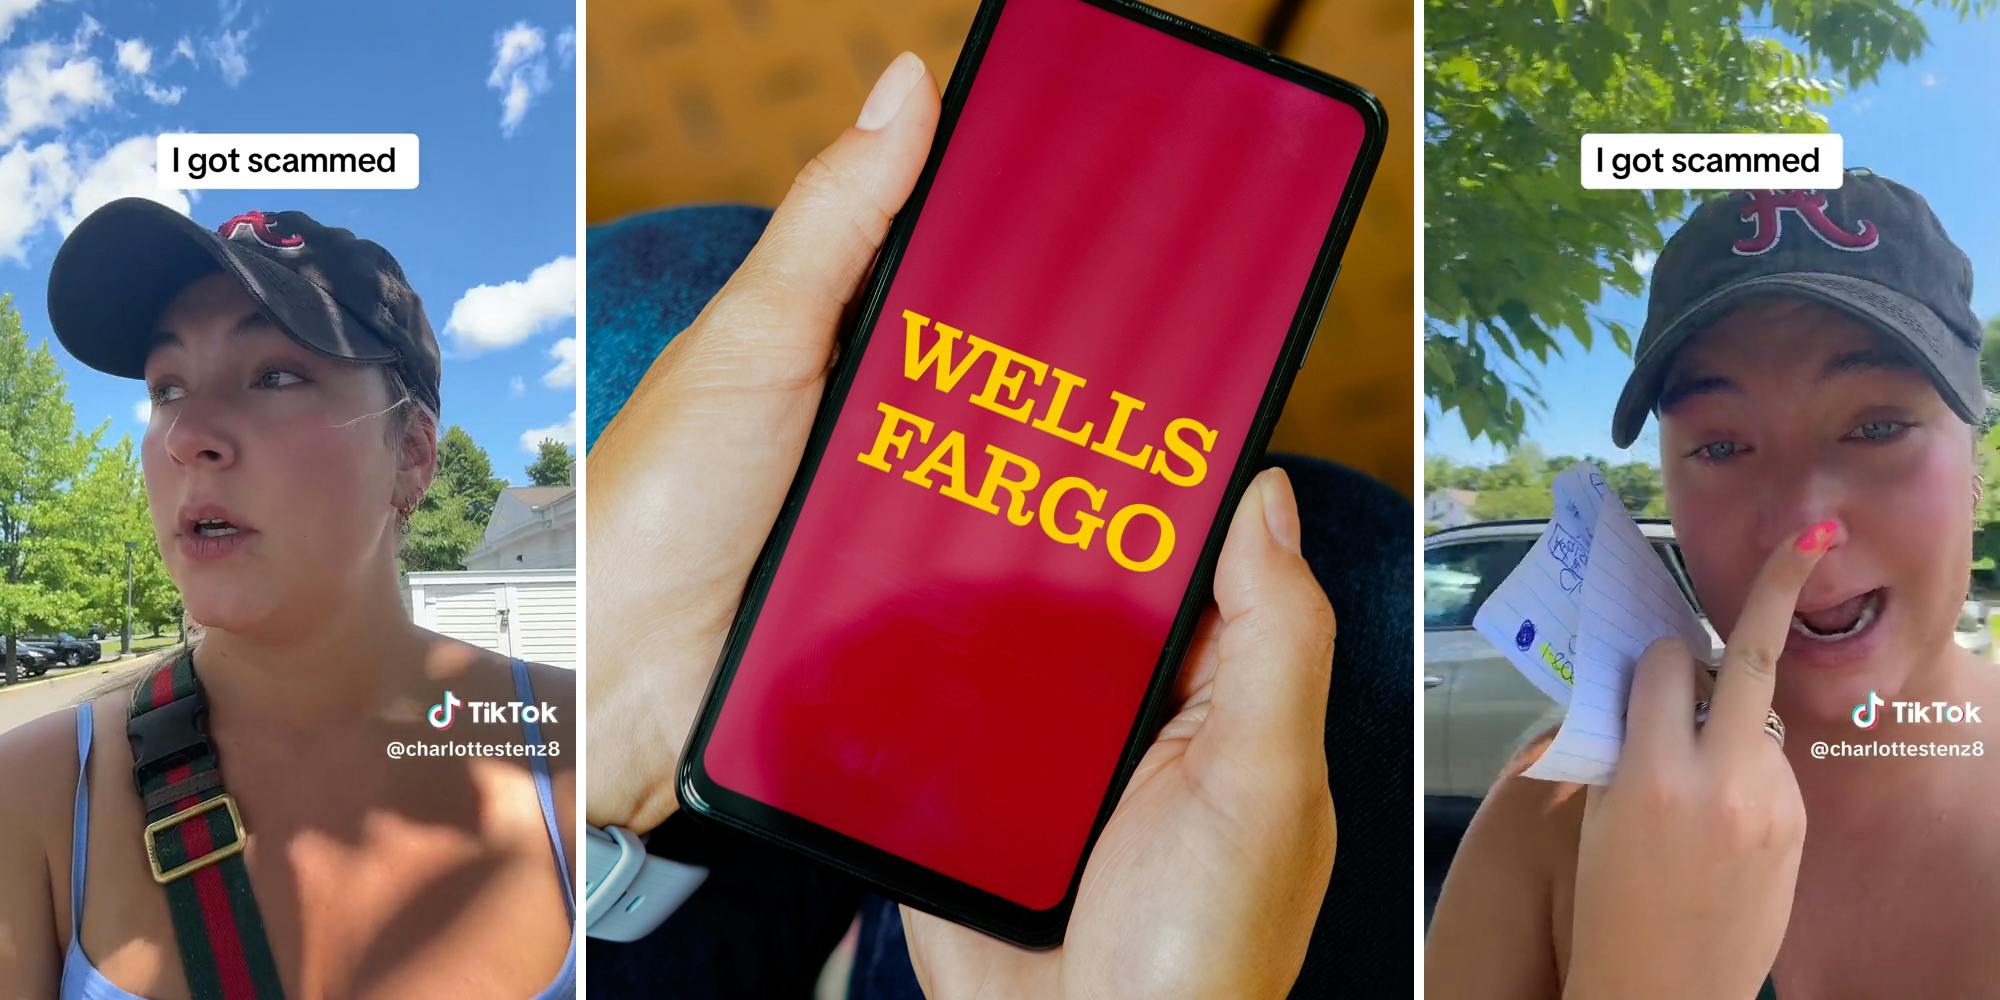 young woman with caption "I got scammed" (l&r) young woman holding phone with Wells Fargo logo (c)